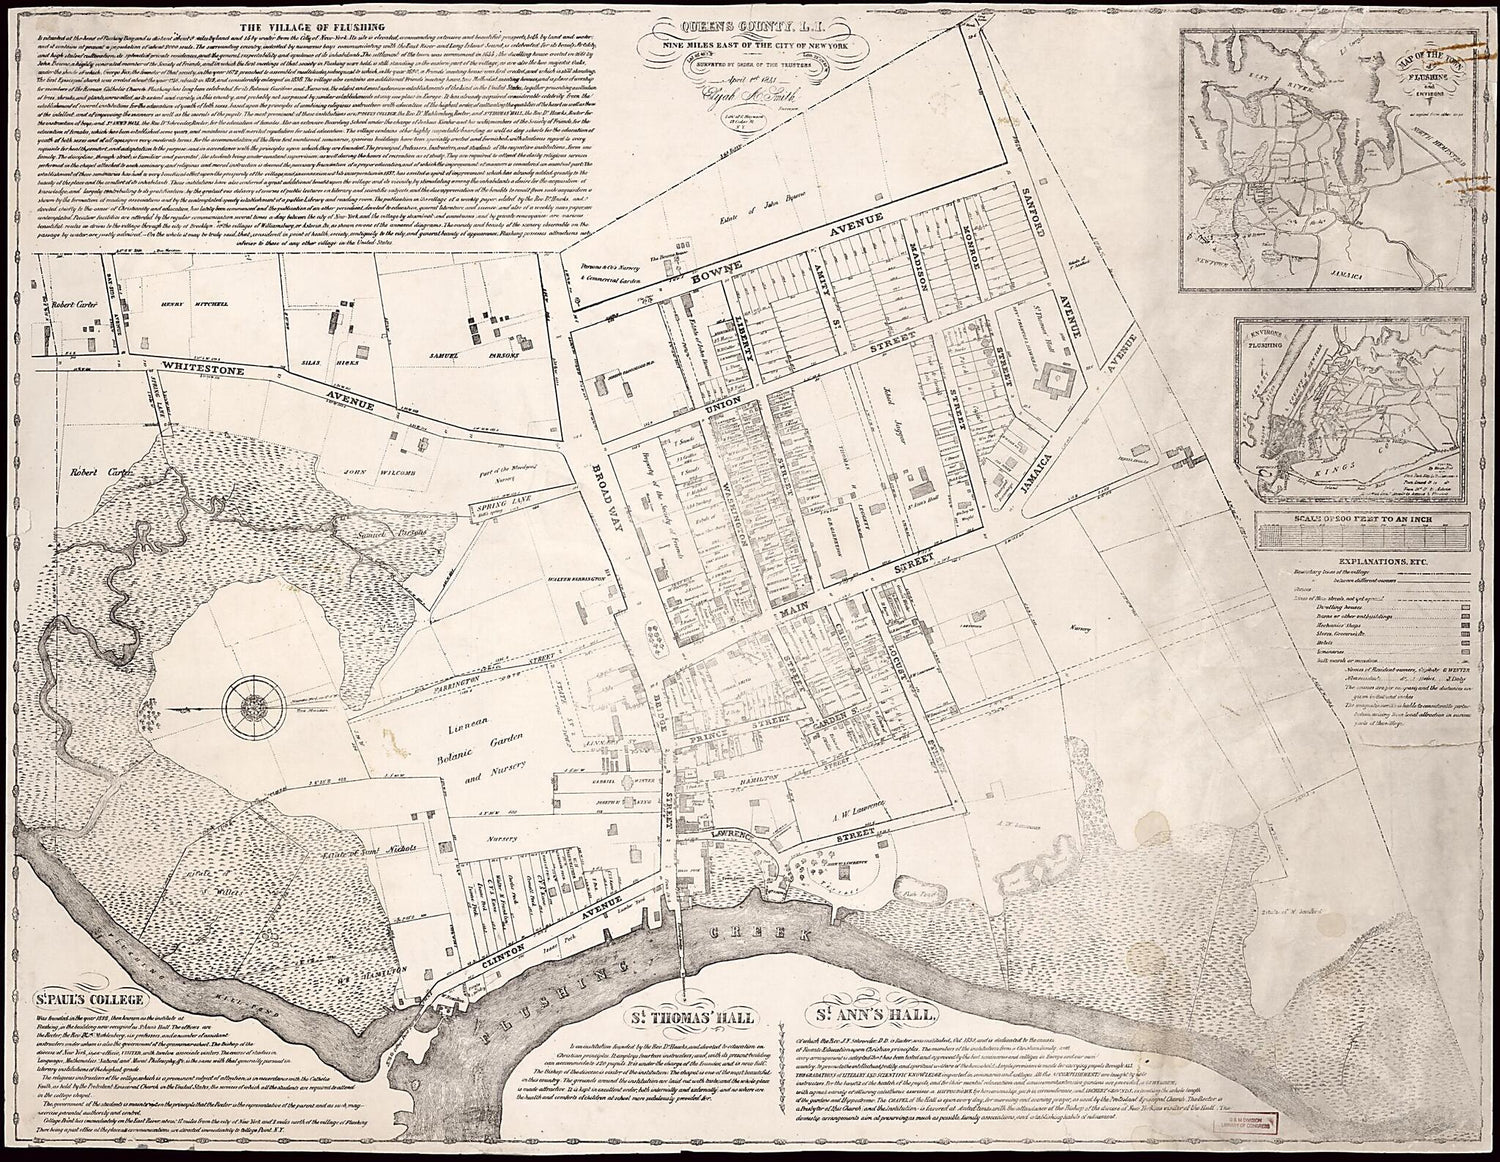 This old map of The Village of Flushing, Queens County, L.I. : Nine Miles East of the City of New York : Lat. 40° 45ʹ 1ʺN, Lon. 73° 09ʹ 58ʺW from 1841 was created by  G. Hayward Lith, Elijah A. Smith in 1841